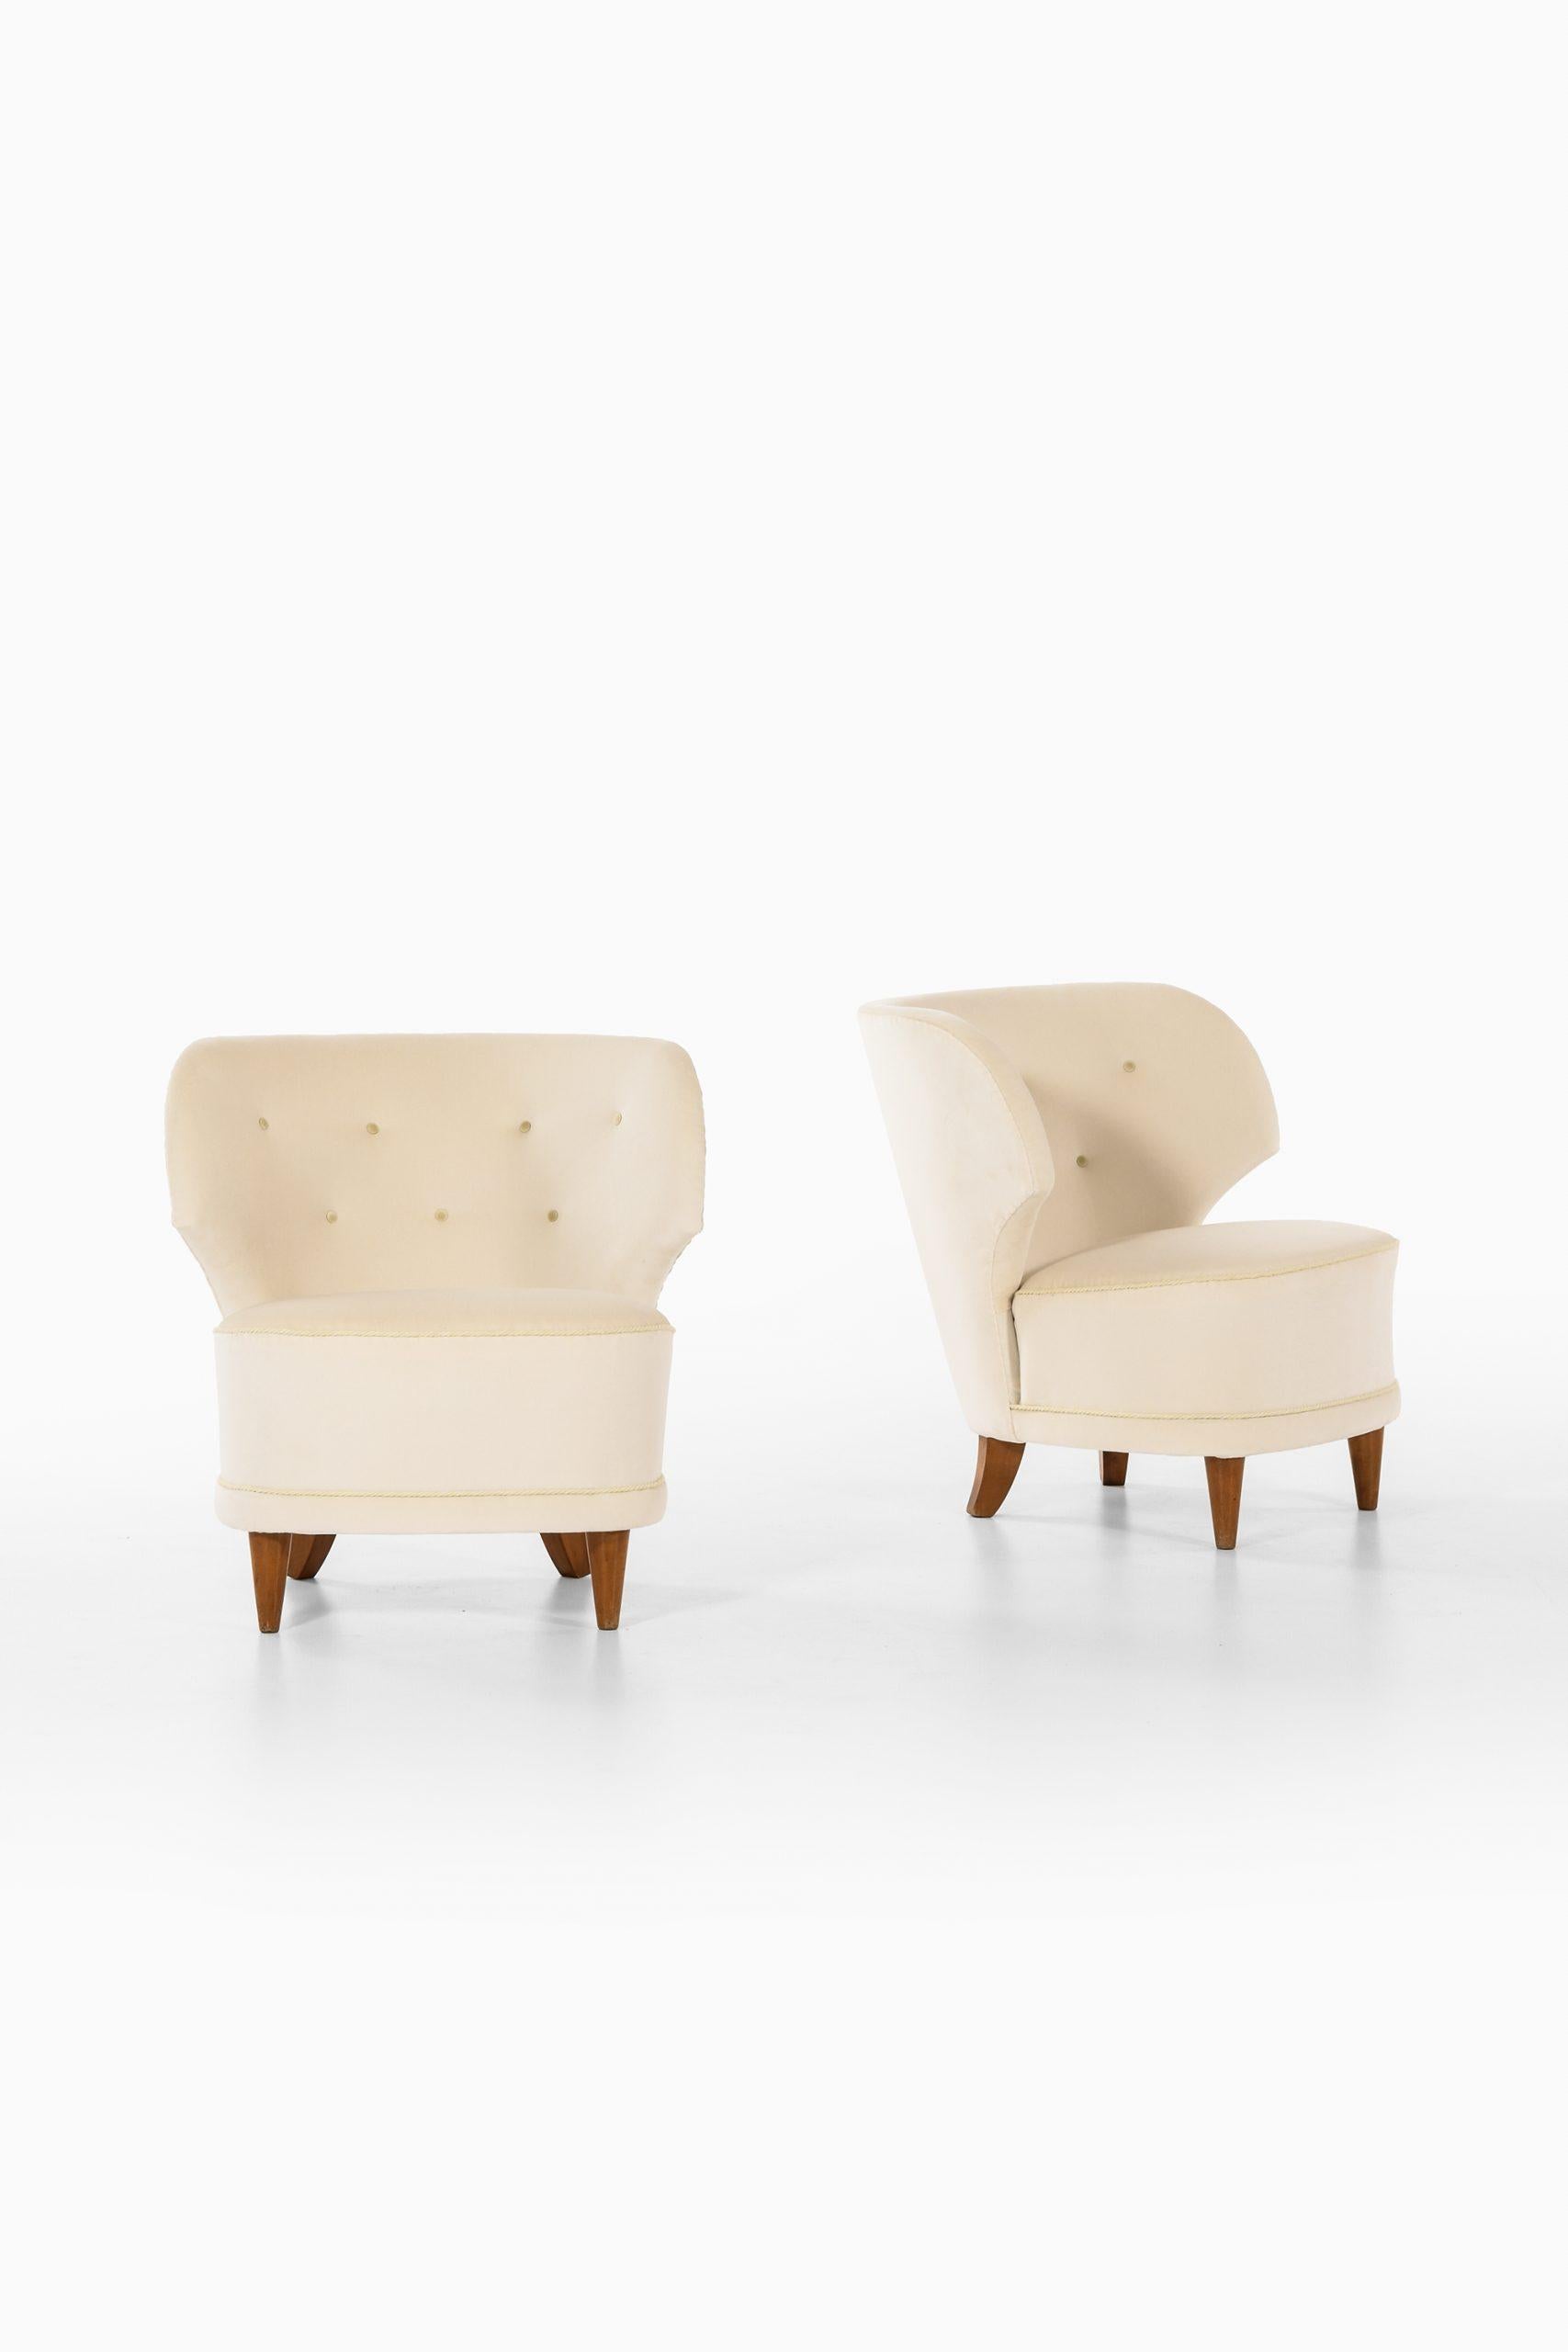 Rare pair of easy chairs designed by Carl-Johan Boman. Produced by Carl-Johan Boman in Finland.